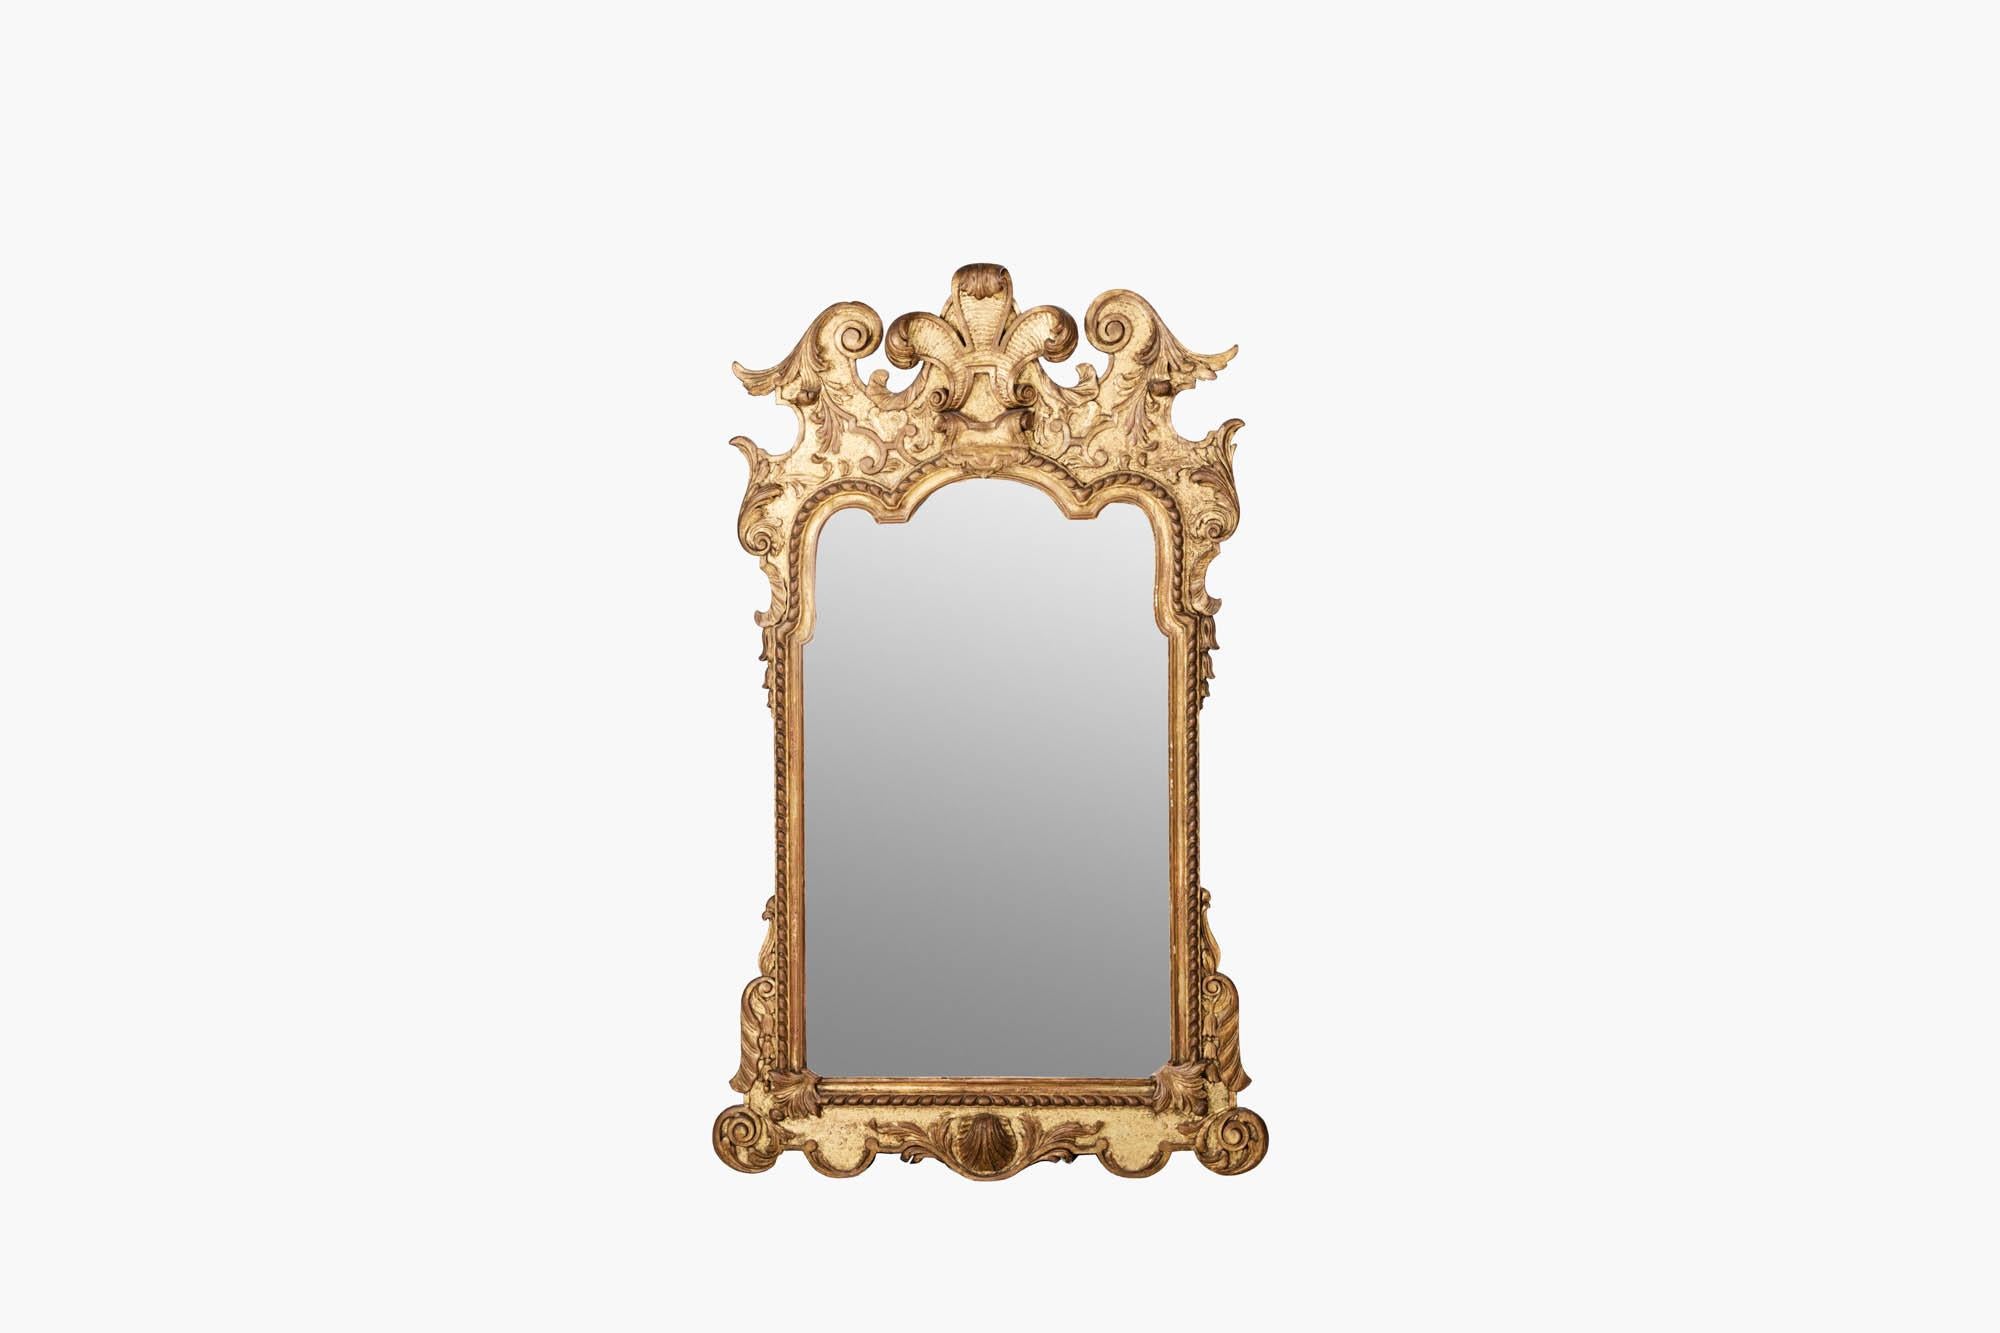 18th century gilt mirror with arched plate in the manner of Belcher. Hightly decorated throughout, the frame displays scrolled foliate detailing, bell drop flowers to the left and right sides, Prince of Wales feathers to the top, and seashell motif